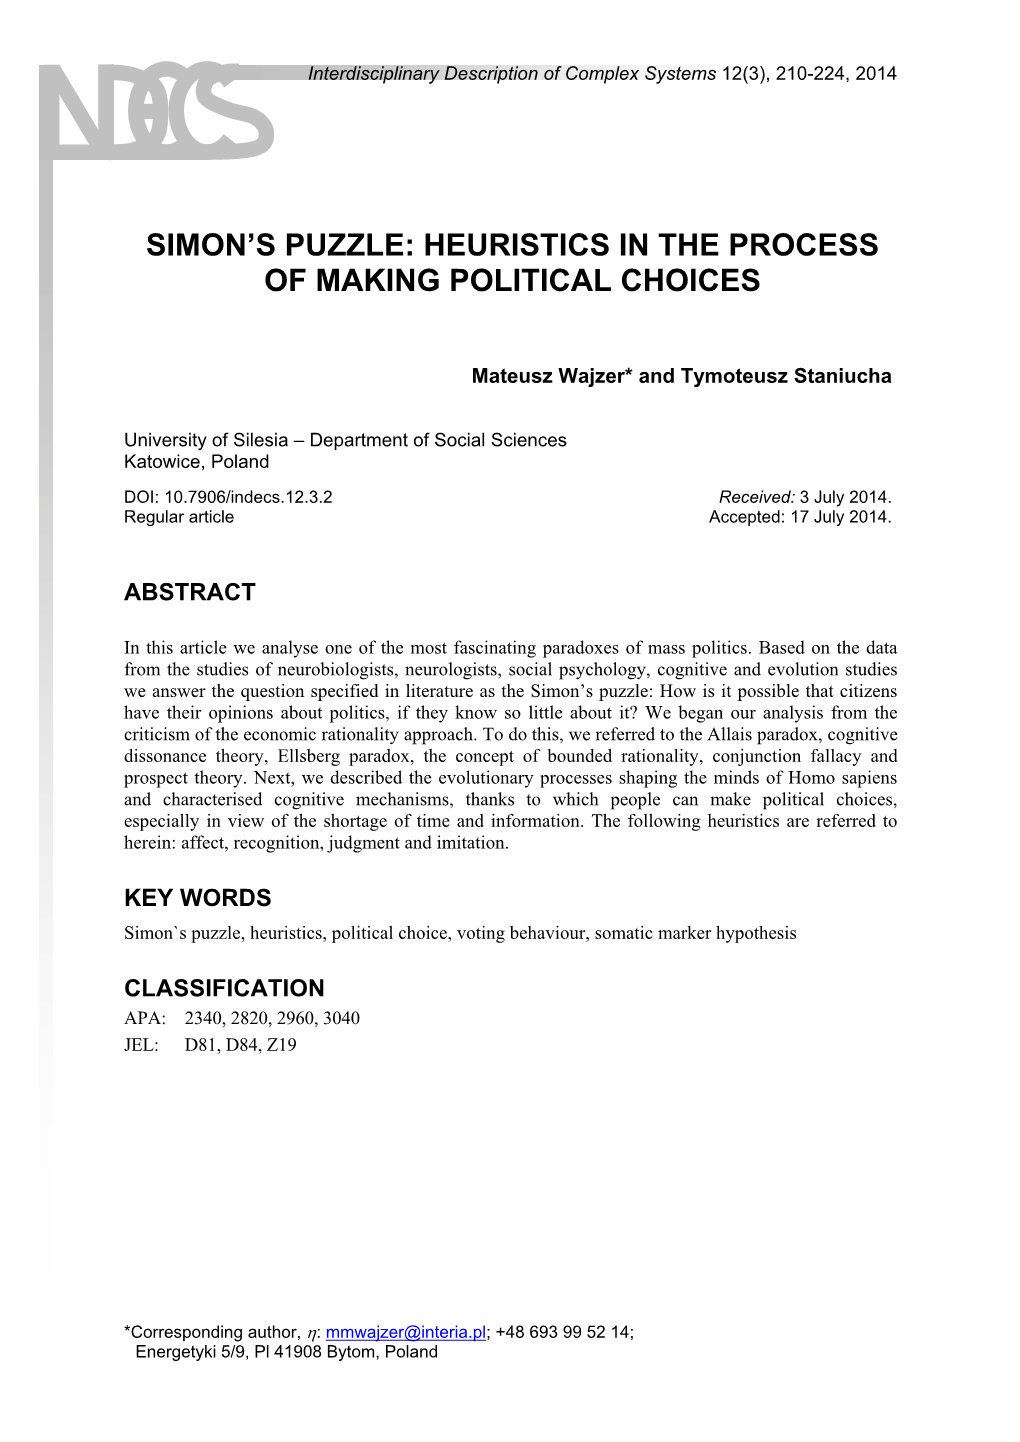 Simon's Puzzle: Heuristics in the Process of Making